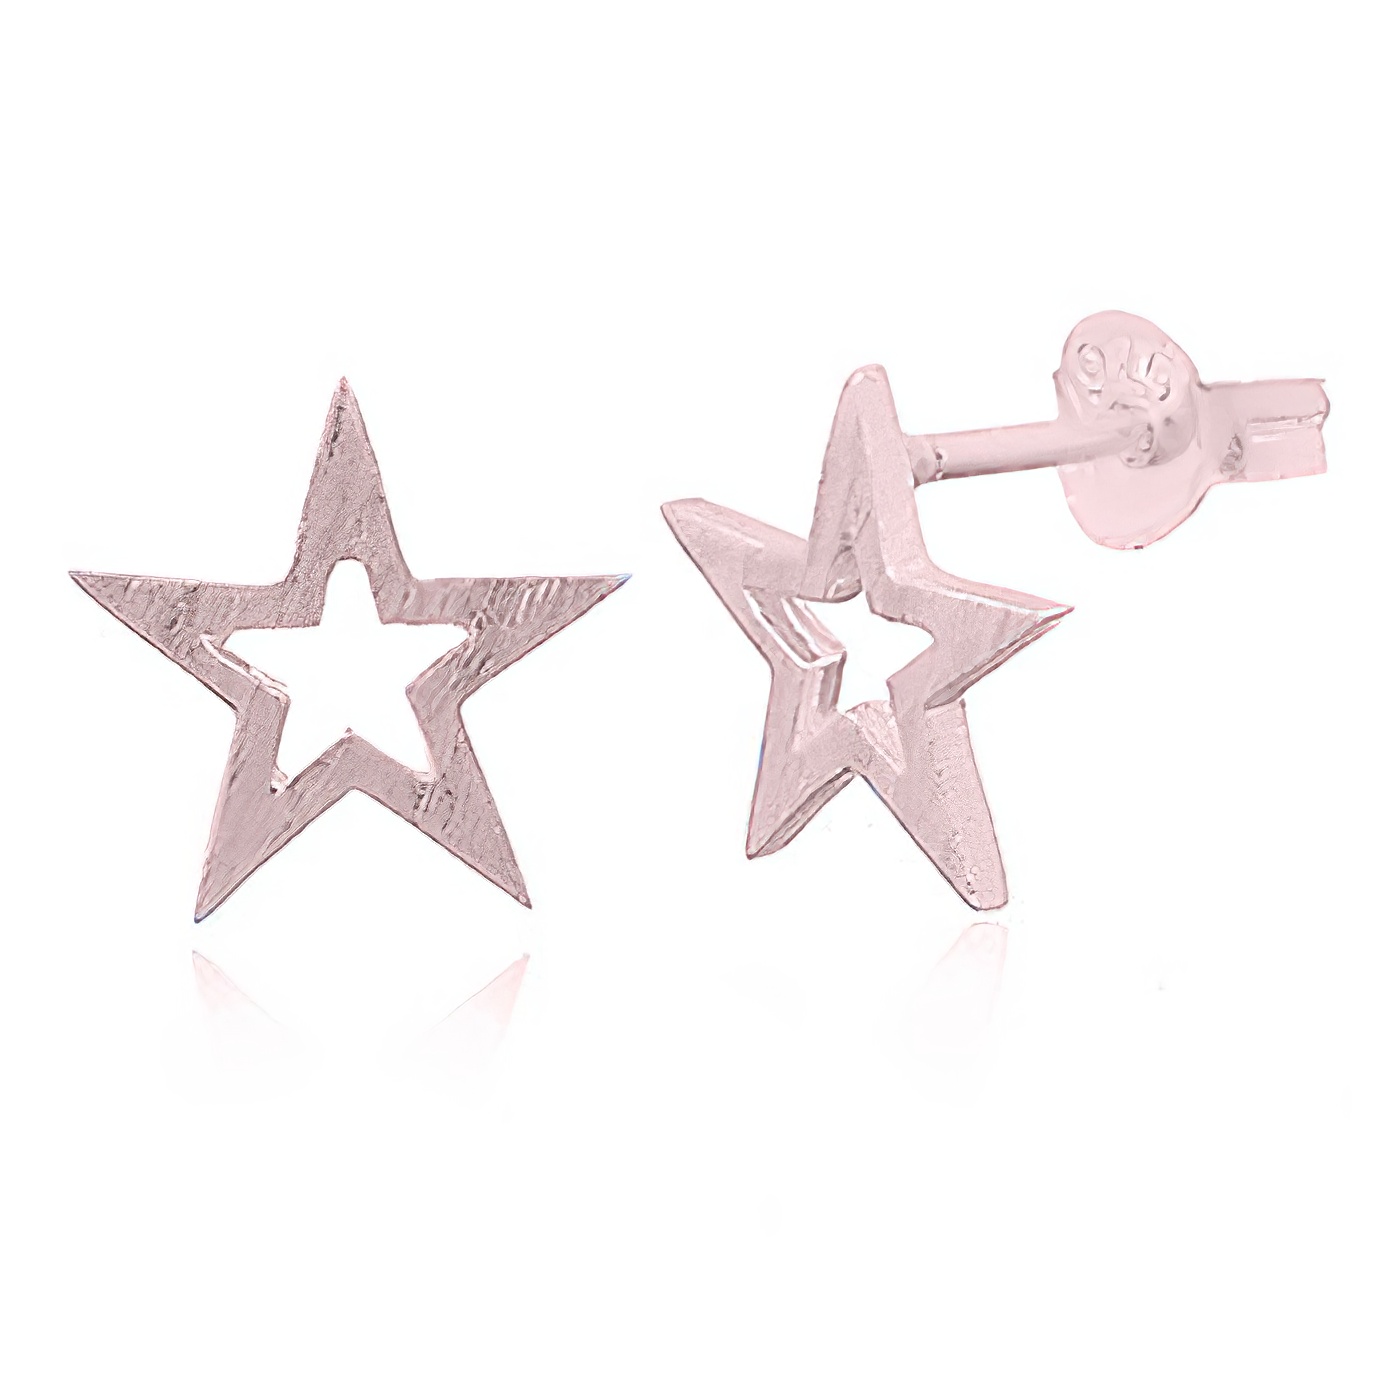 Brushed Silver Star Earrings Rose Gold Plated by BeYindi 